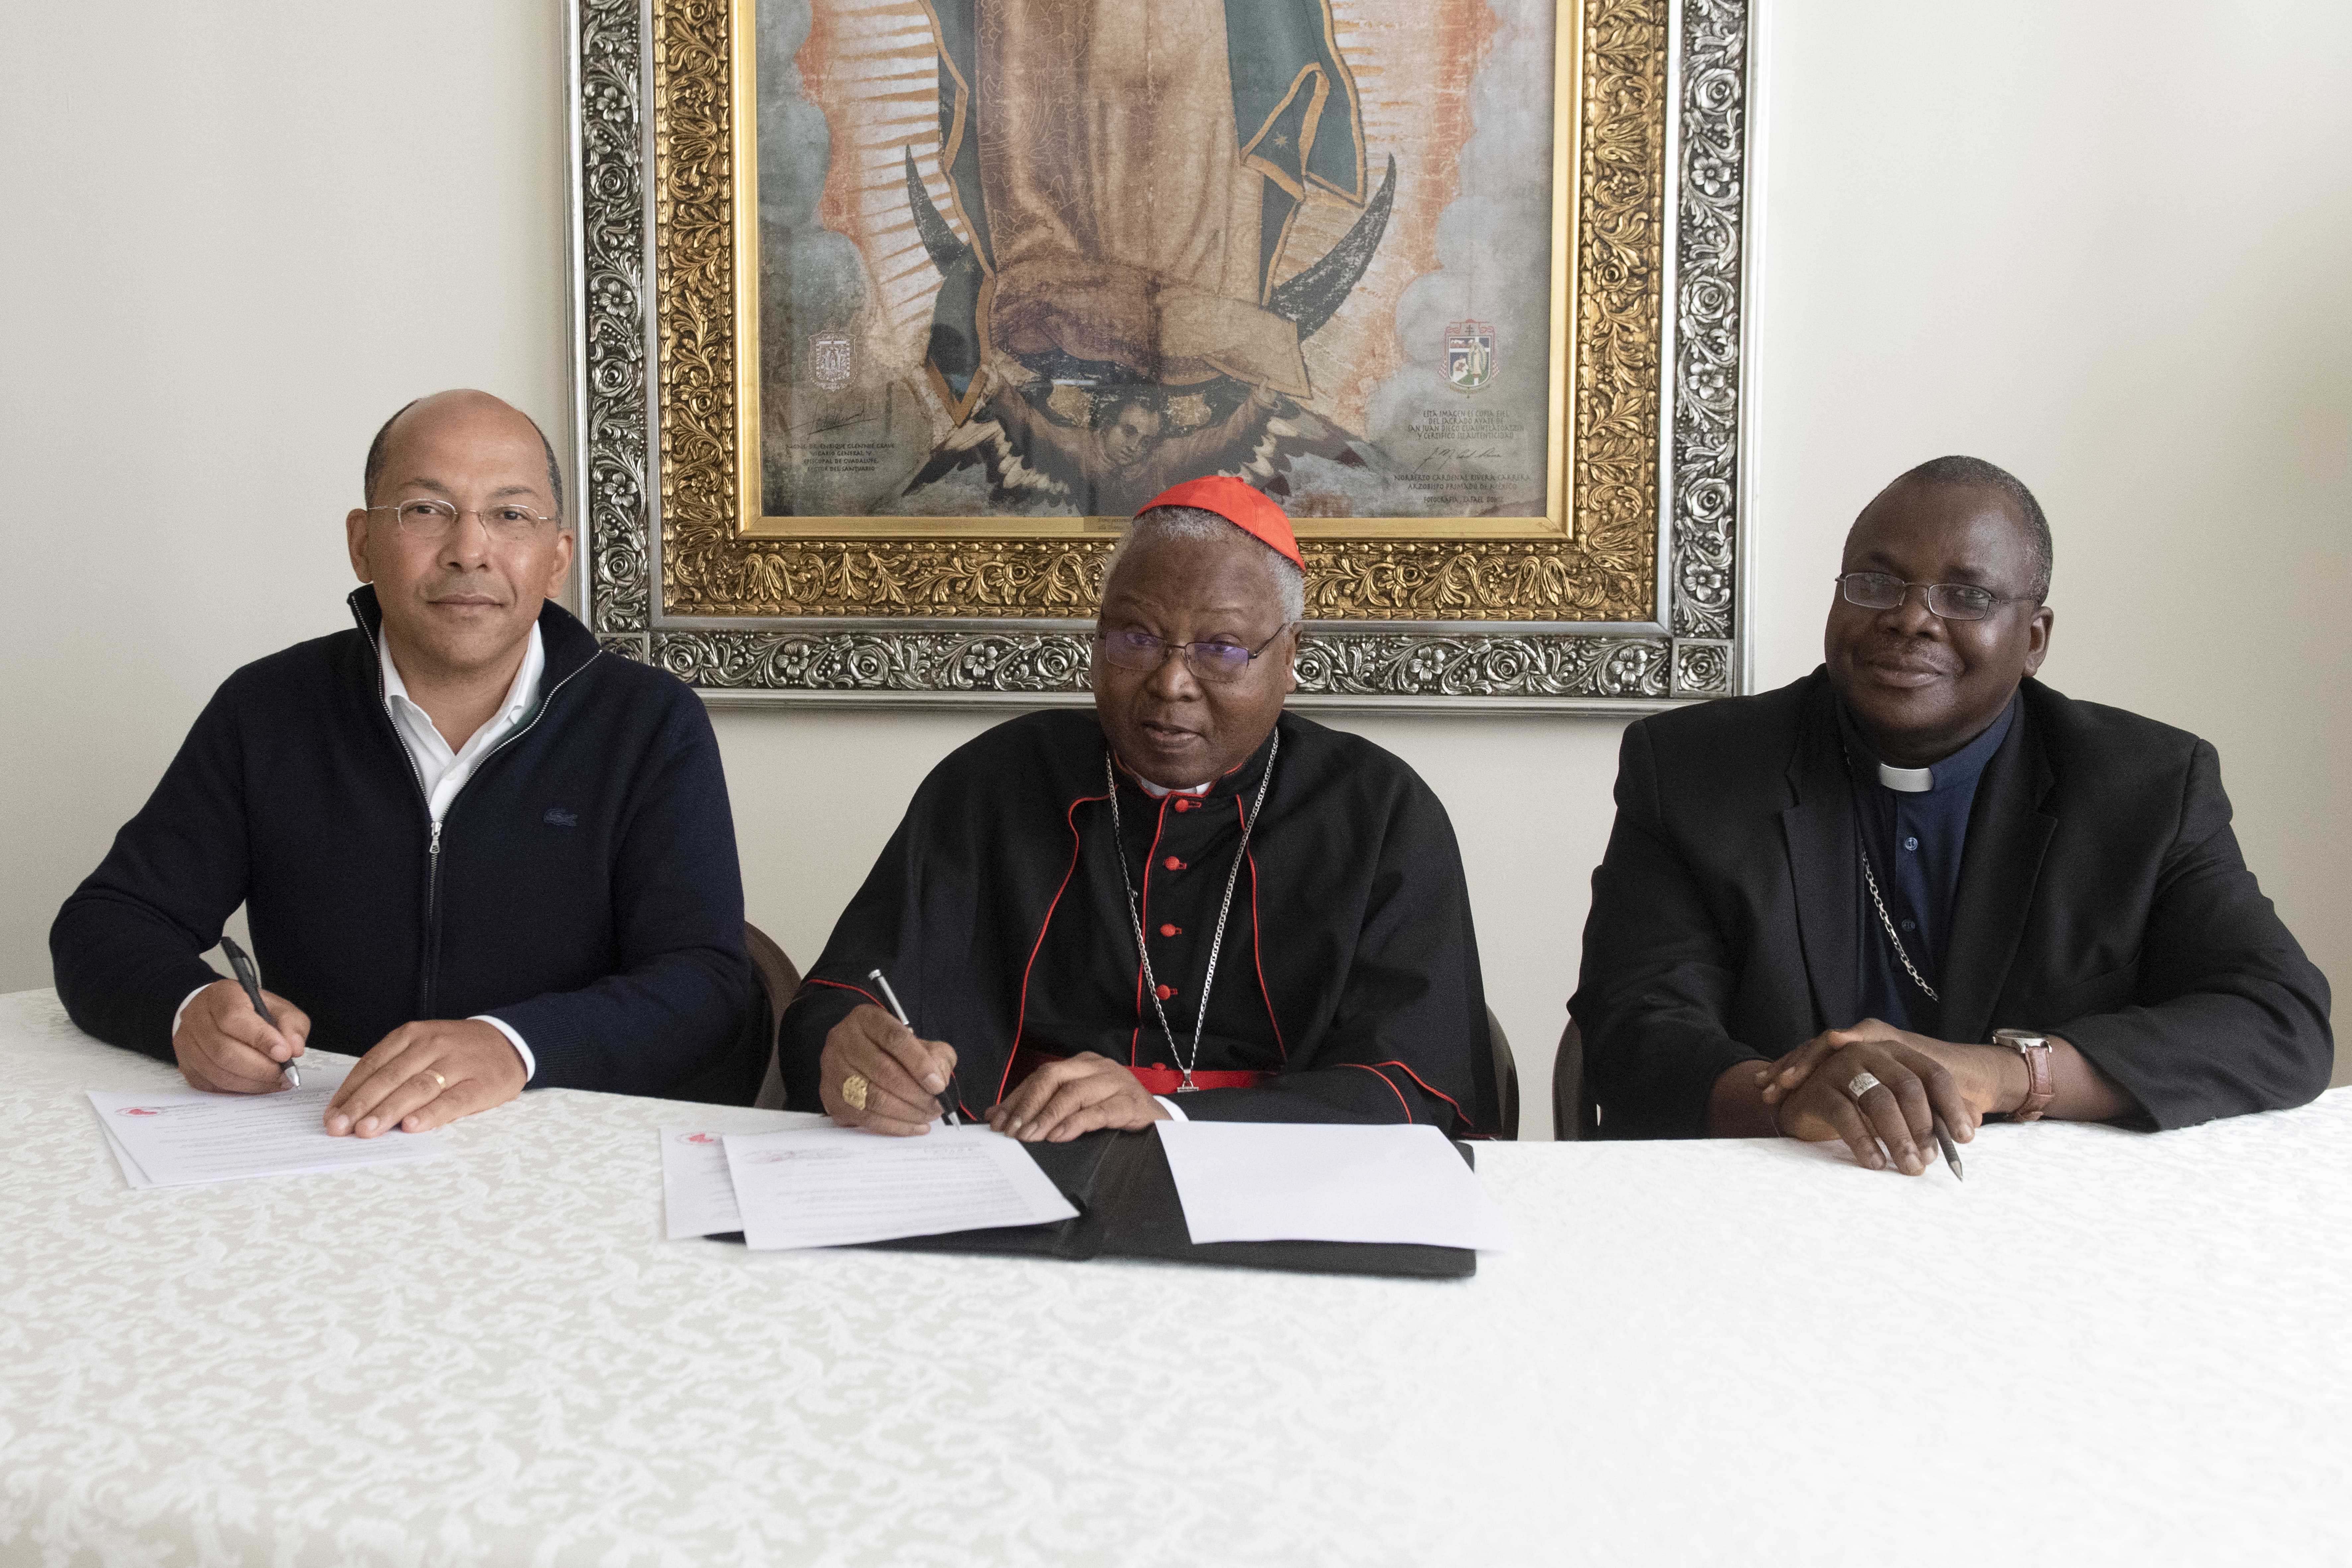 APO Group partners with the Catholic Church in Africa